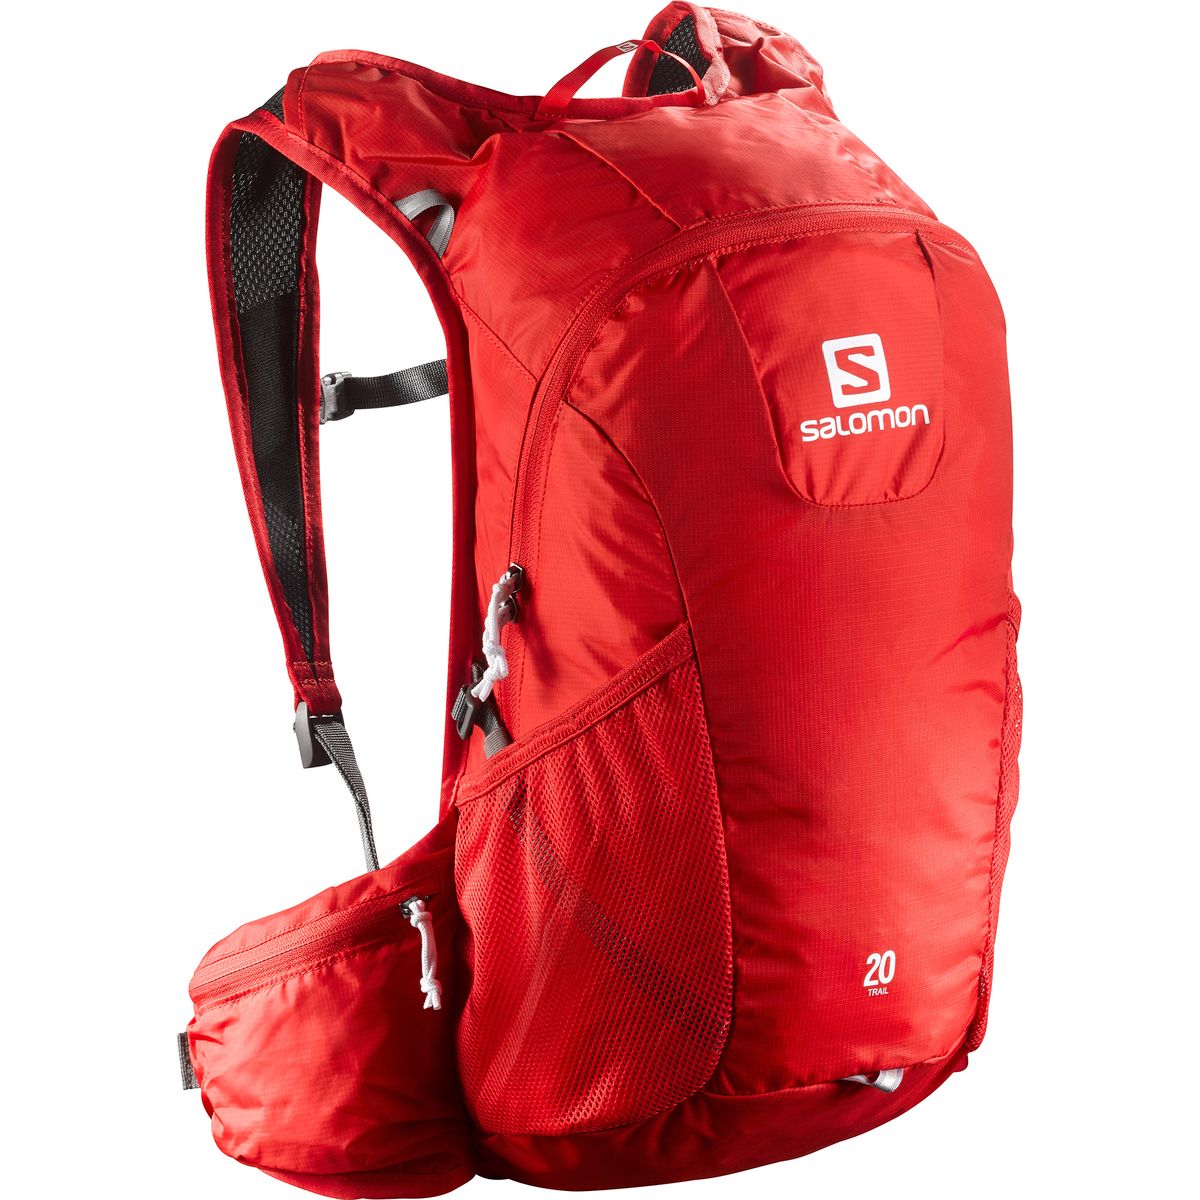 Salomon Trail 20L Backpack | Competitive Cyclist